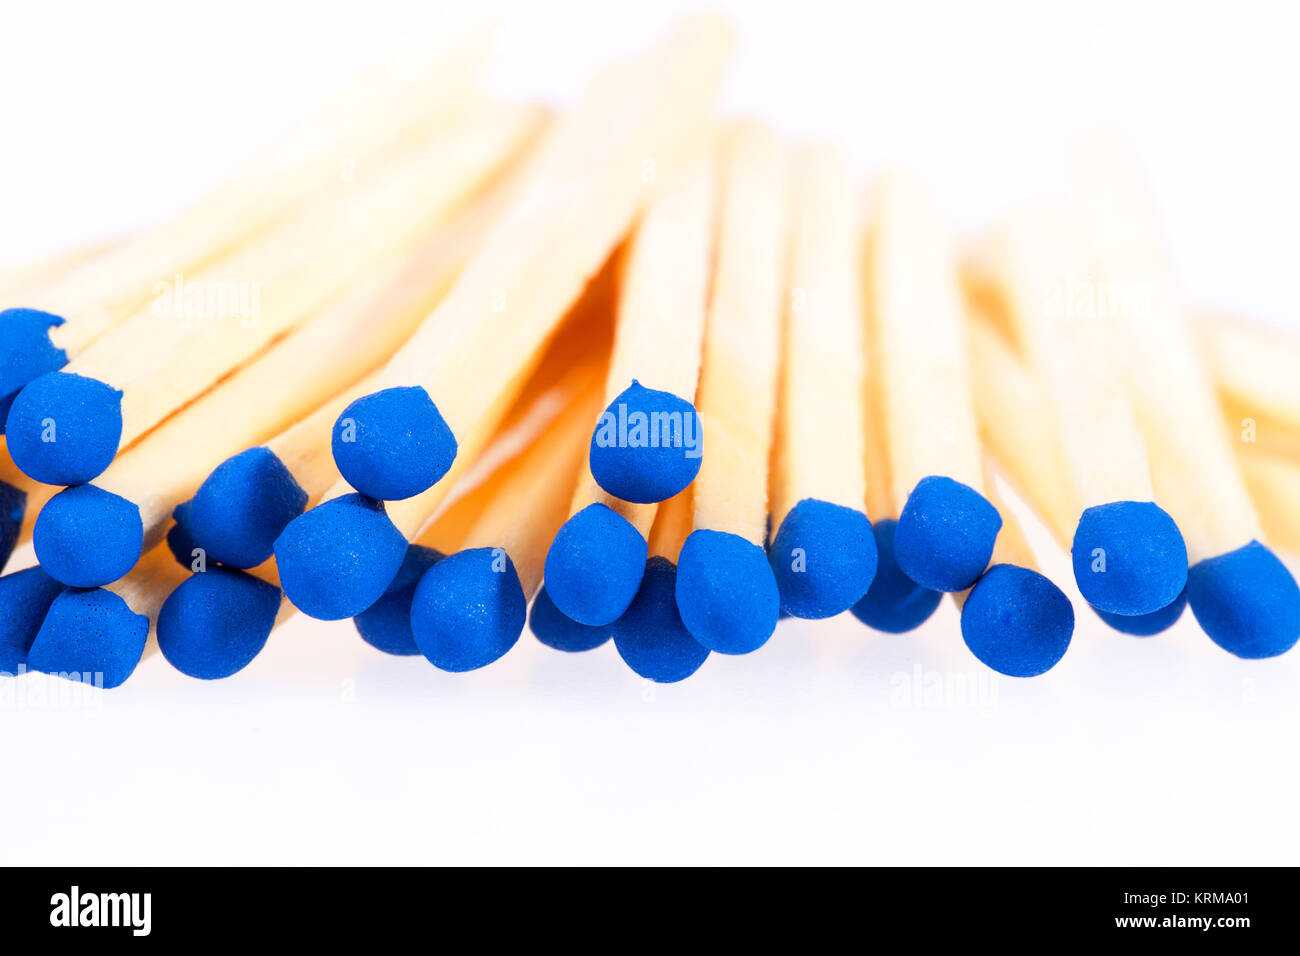 Heap of matches with blue heads isolated on white background Stock Photo